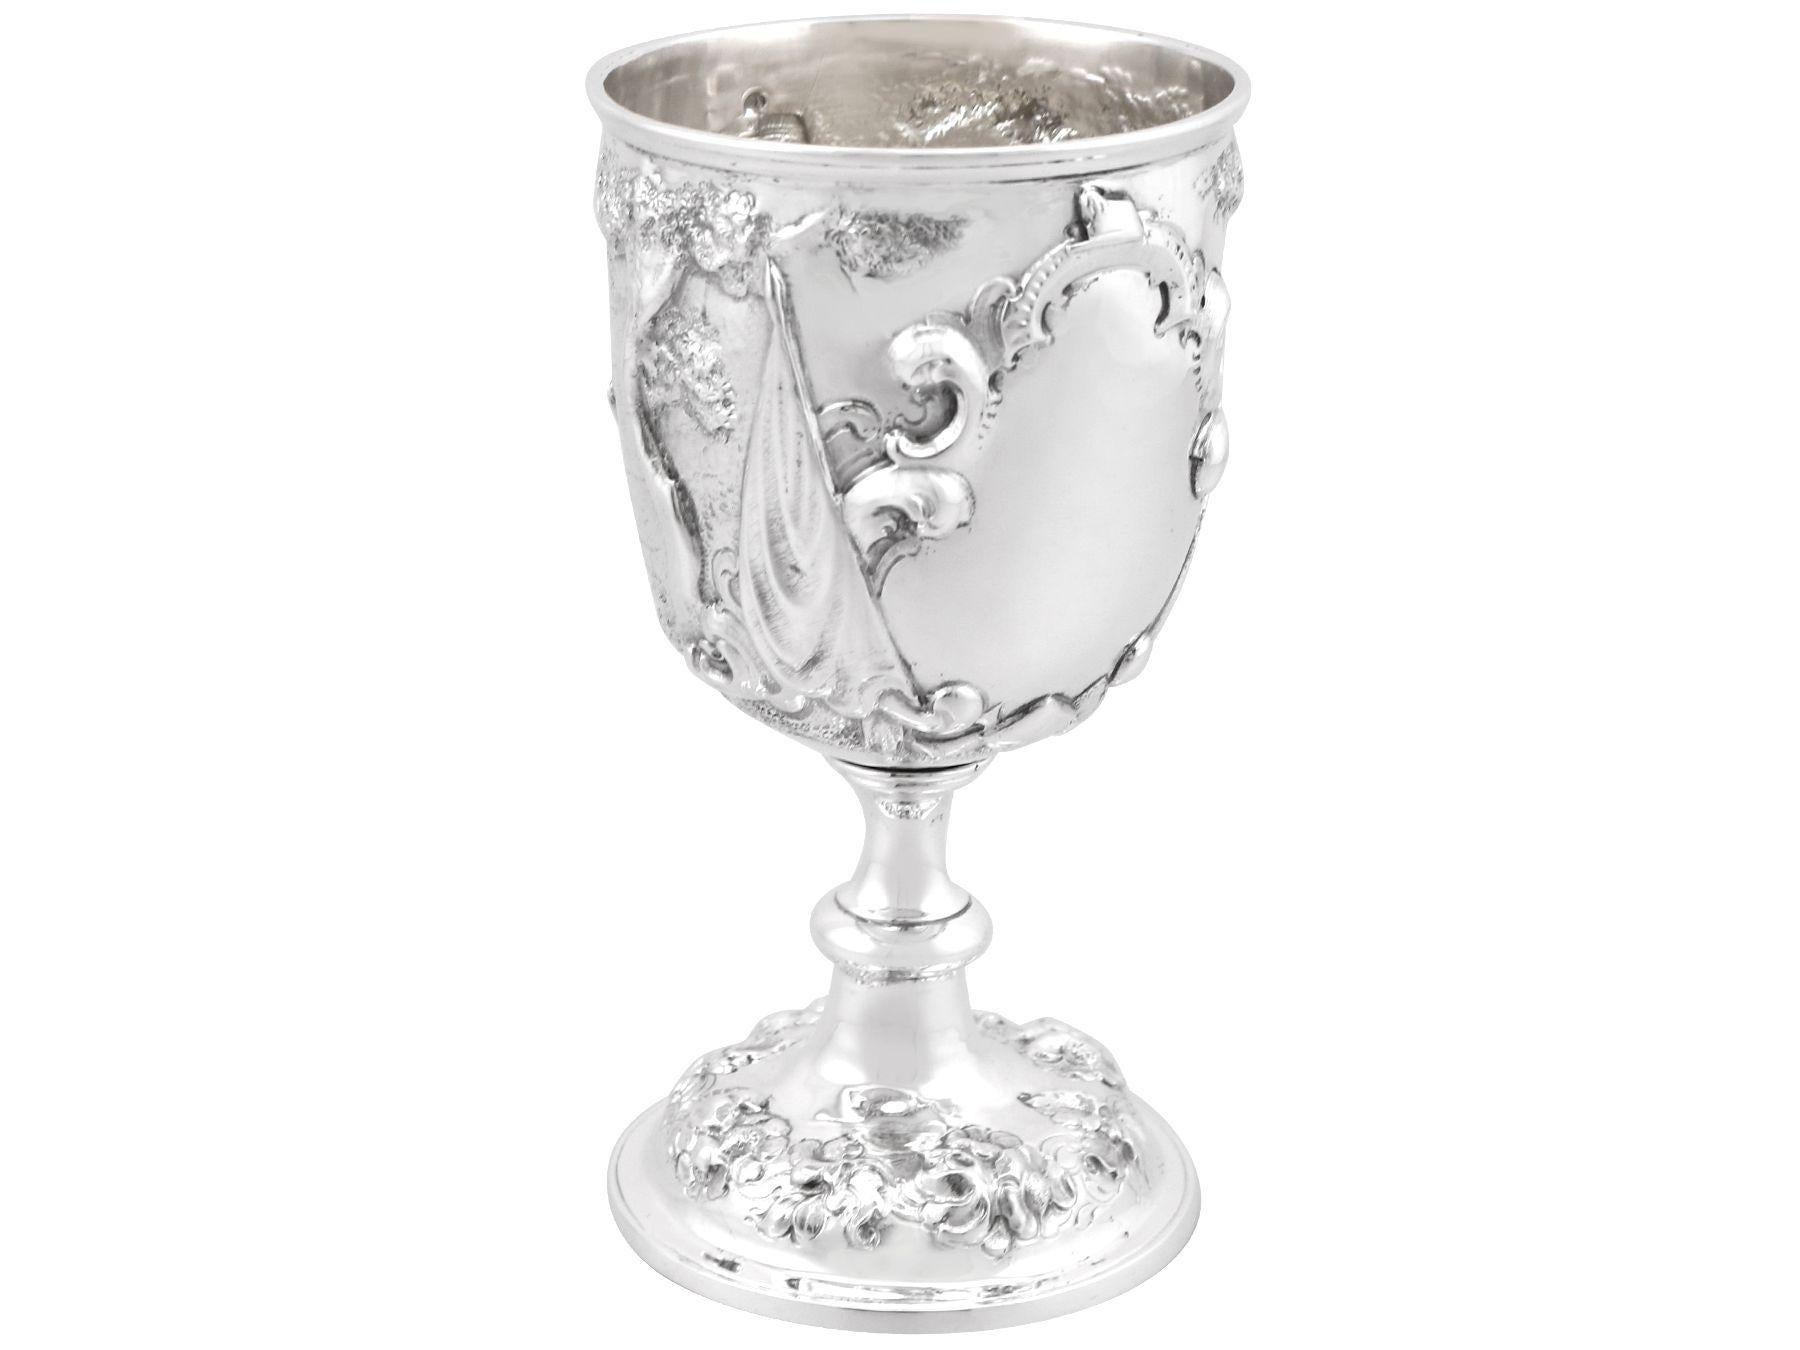 An exceptional, fine and impressive antique Victorian English sterling silver goblet; an addition to our collection of wine and drinks related silverware.

This exceptional antique Victorian sterling silver goblet has a circular bell-shaped form